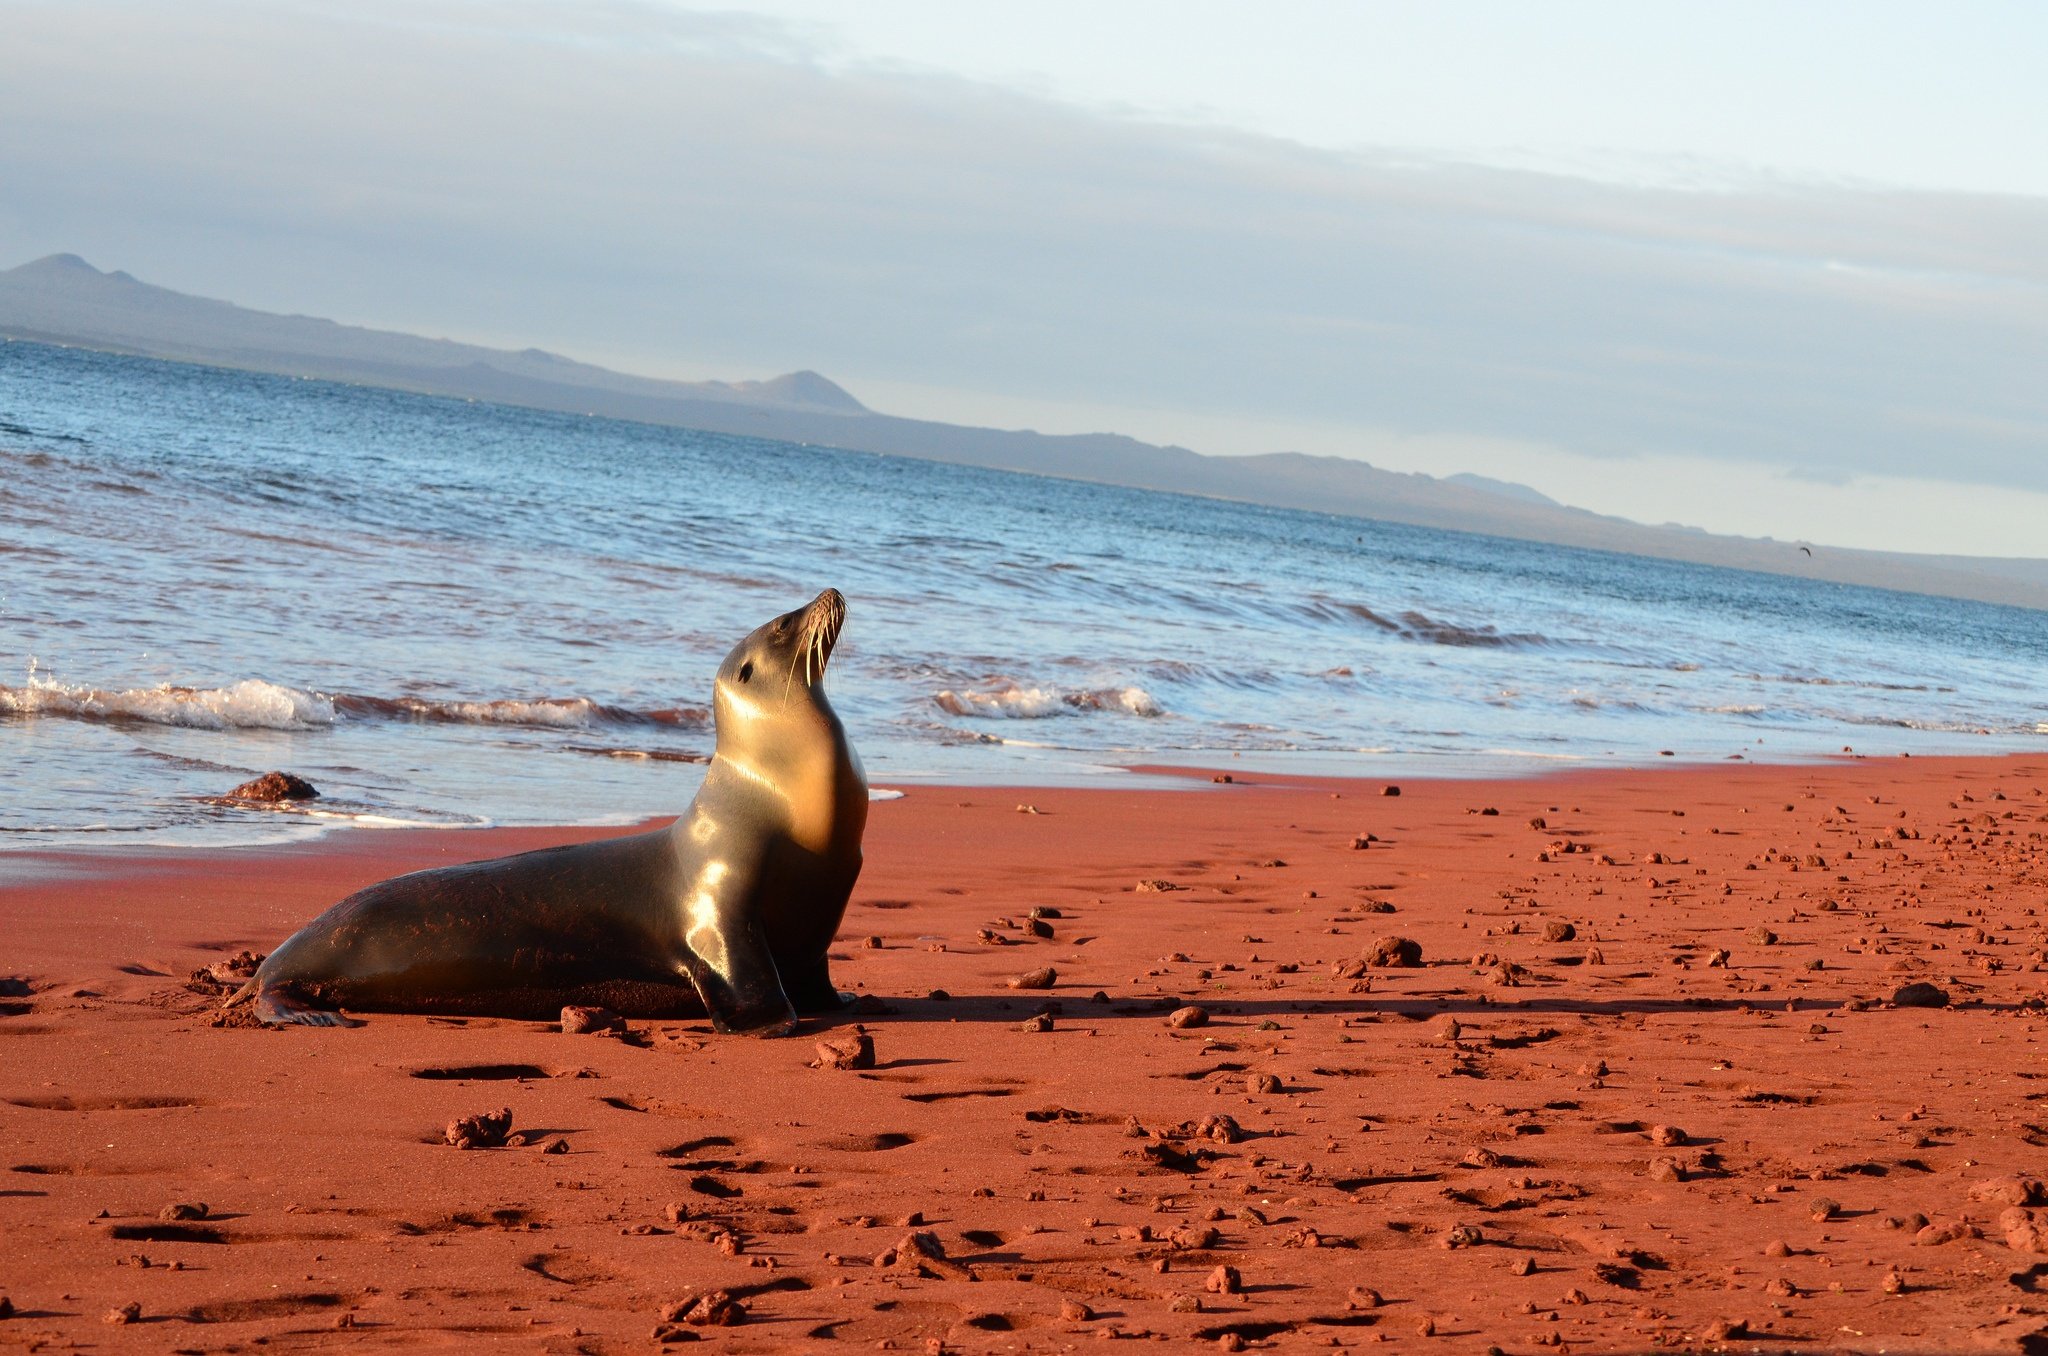 A seal on an exotic beach in the Galapagos Islands